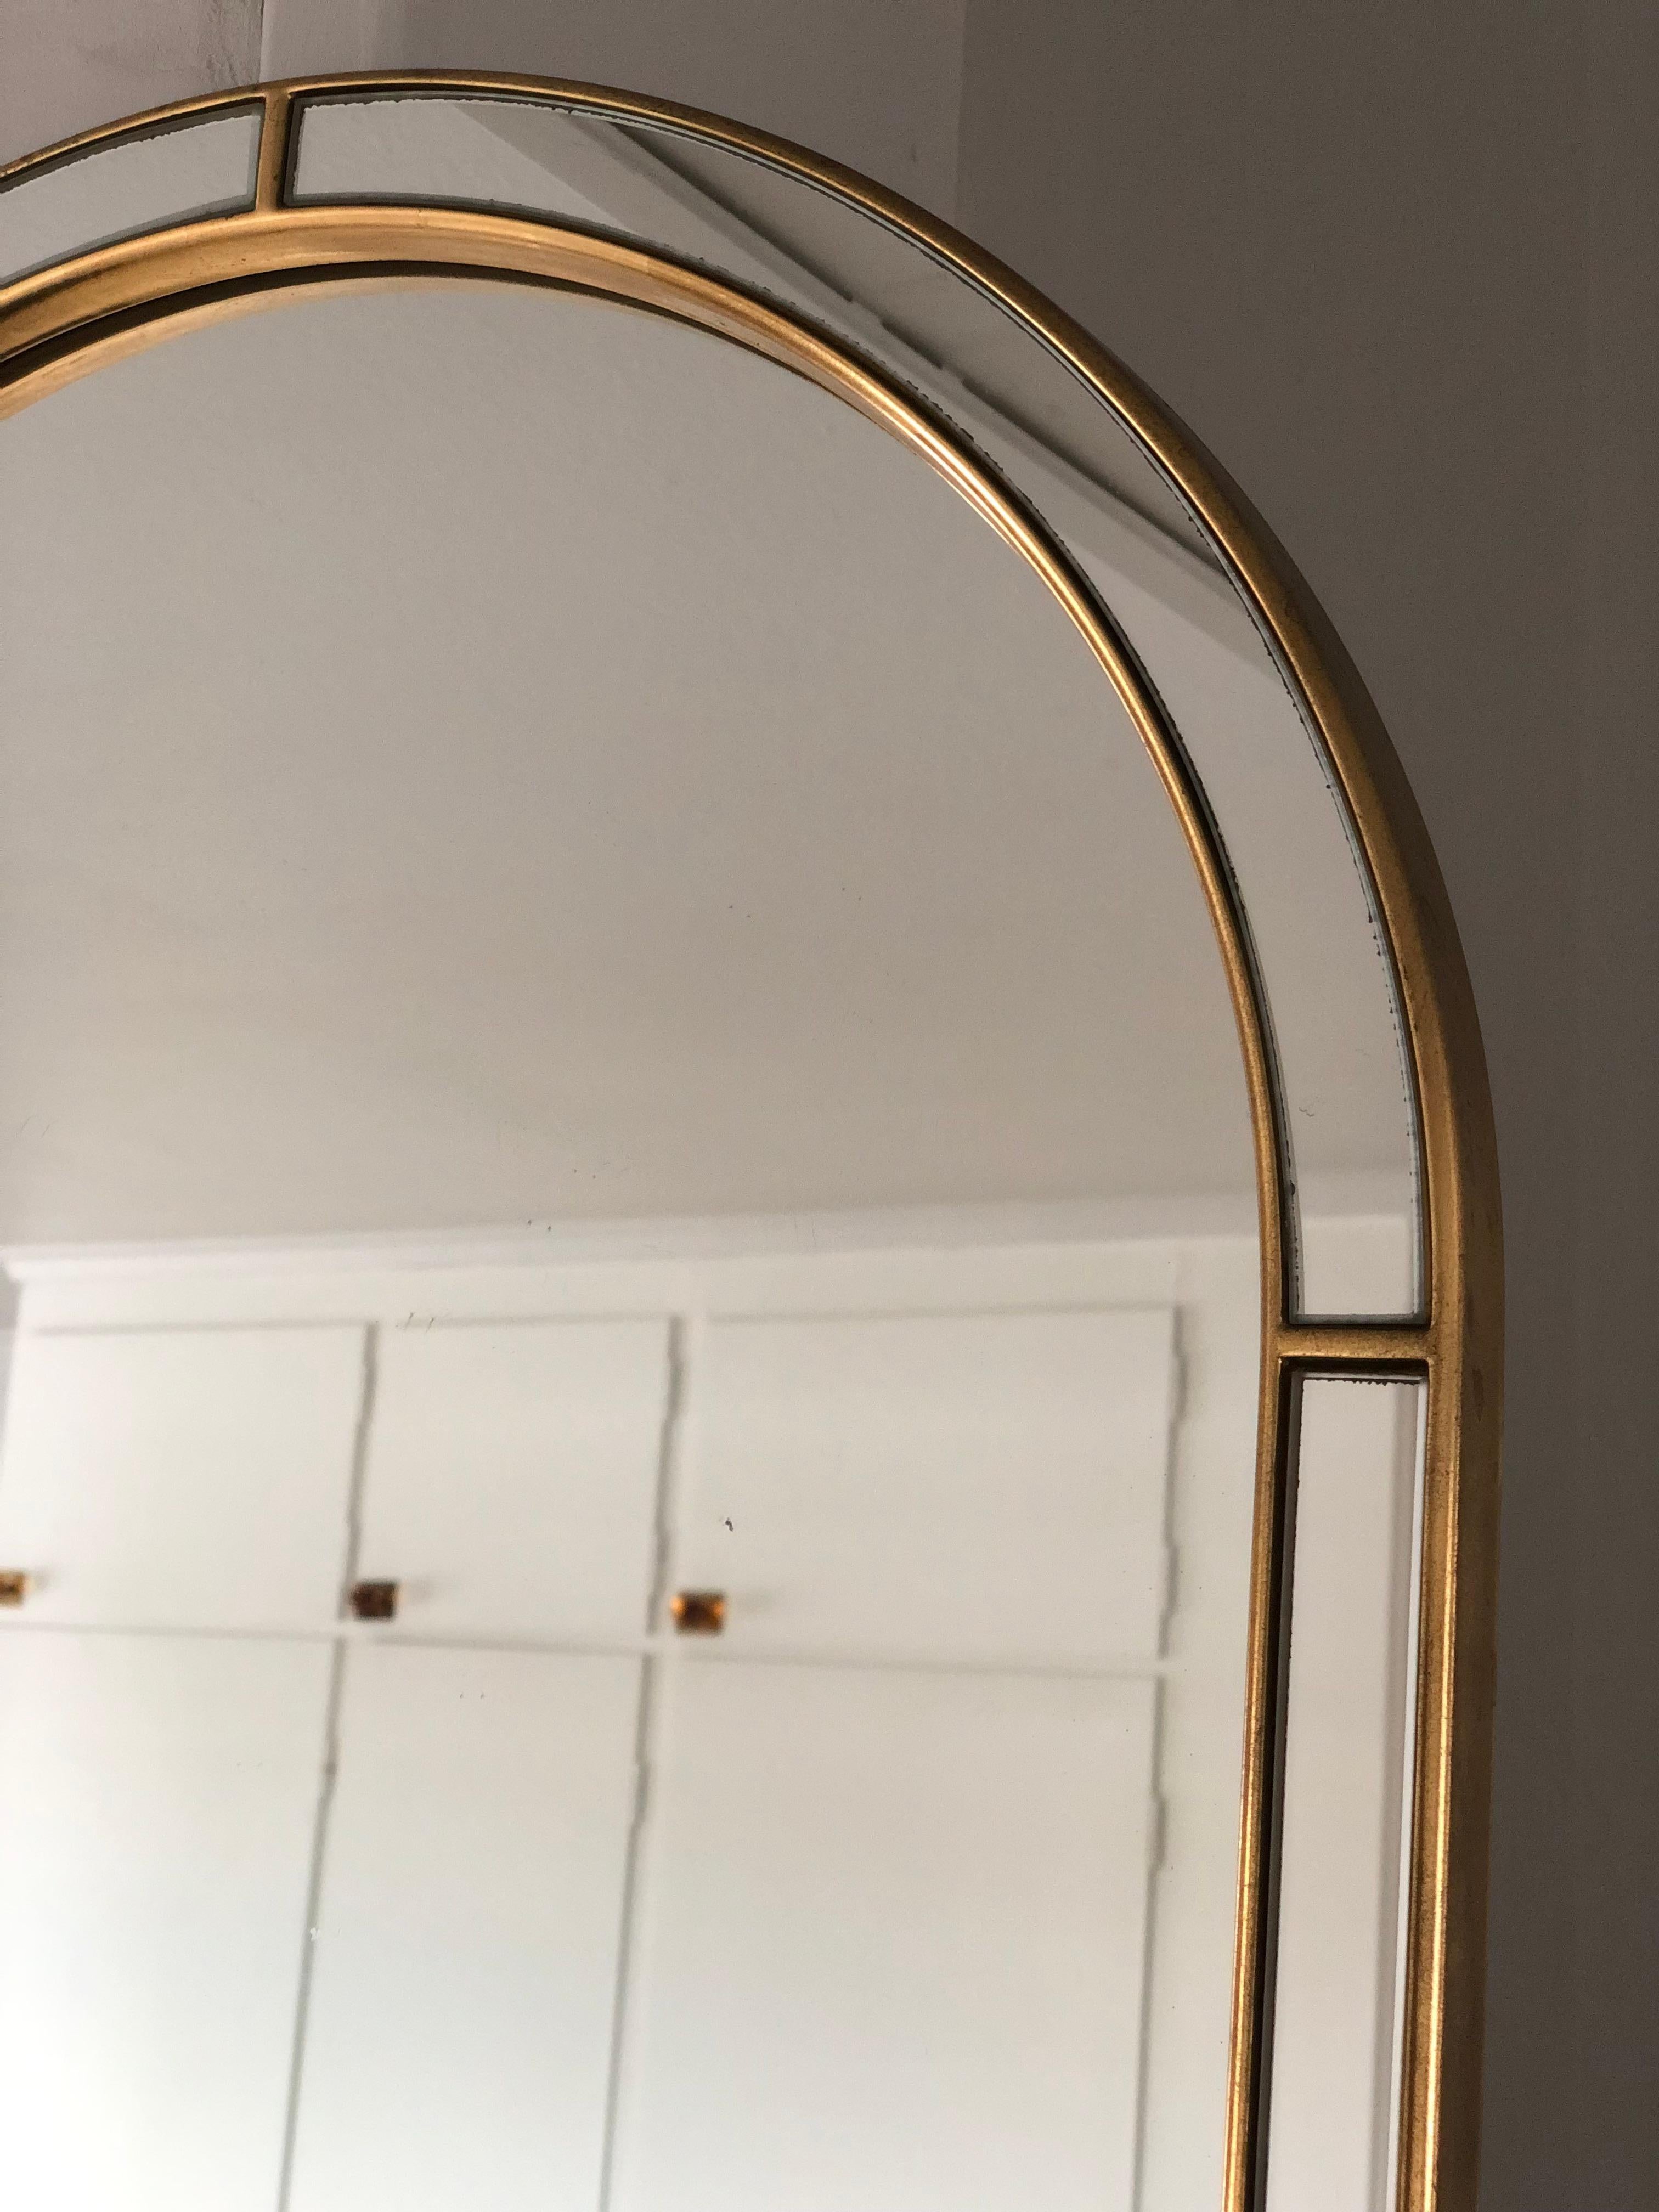 Beautiful vintage full length mirror in gold from Deknudt mirrors from Belgium. Small Cut mirrors are placed in the golden frame. Deknudt is known for its quality mirrors from the 70/ 80s.

Object: Mirror
Designer: Deknudt
Mark:: A Deknudt